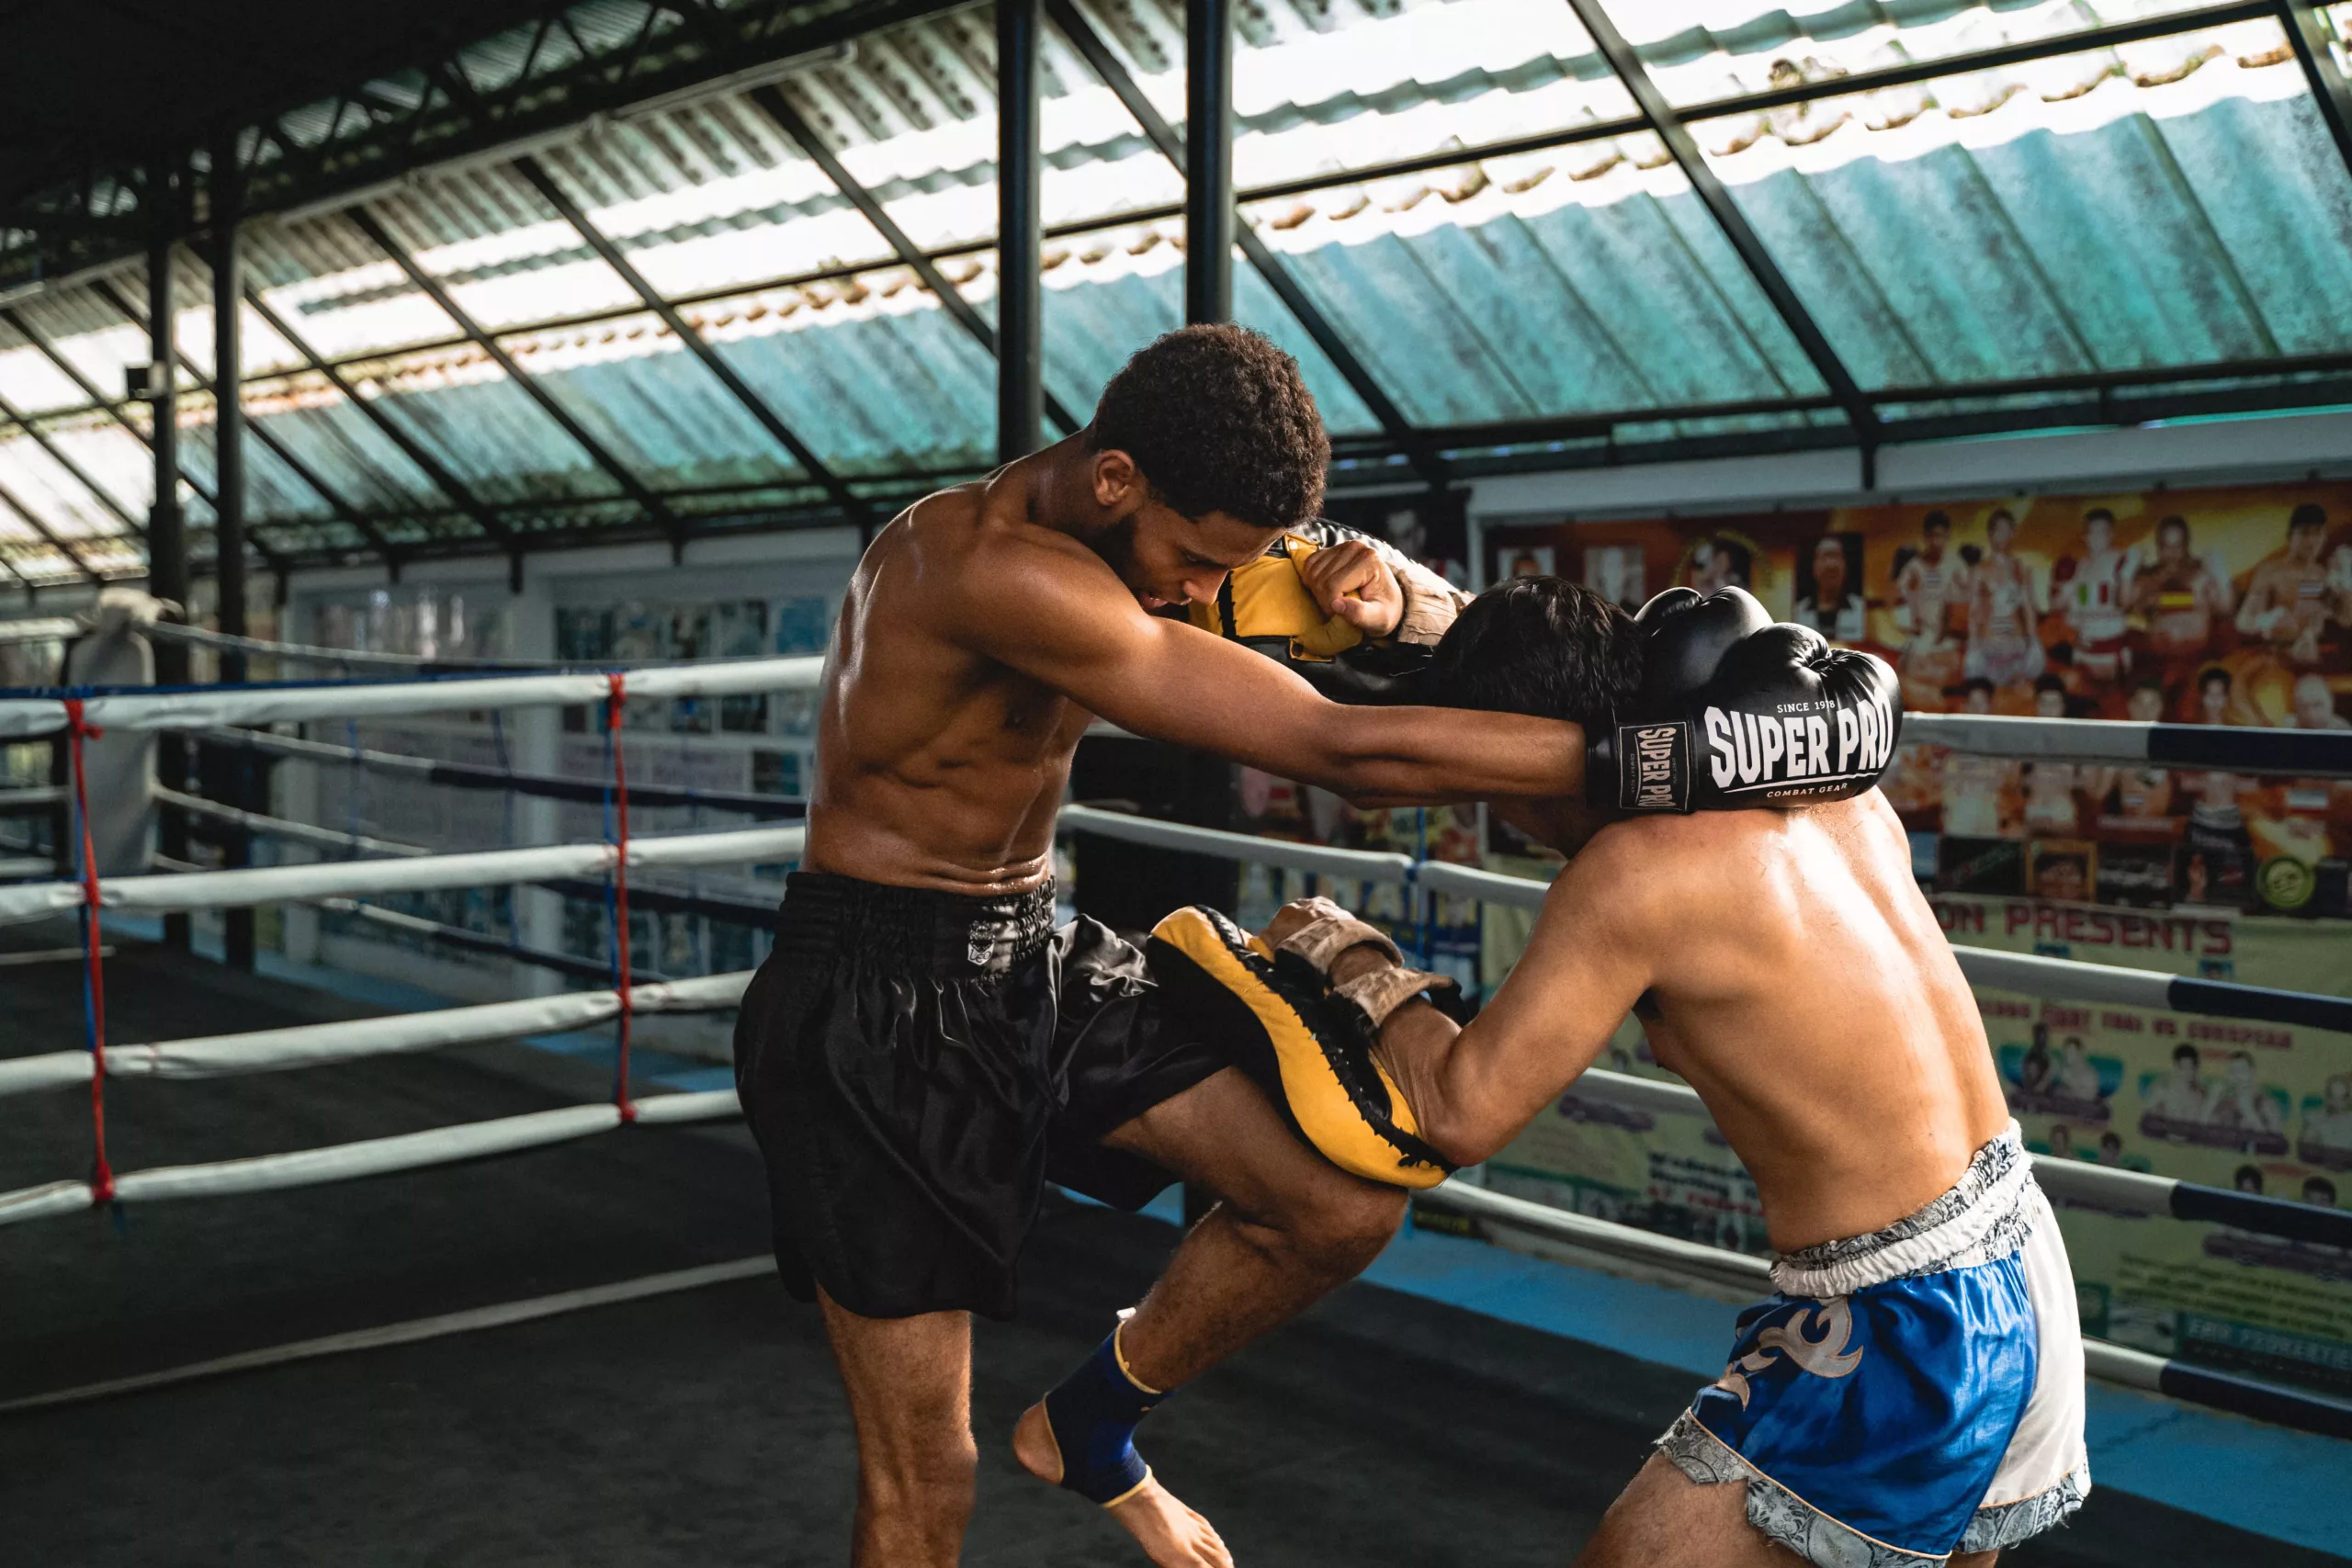 Muay Thai trainer with an athlete engage in close combat training inside a ring, with one executing a knee strike while the other uses arm control, both showcasing intense focus and physical prowess.